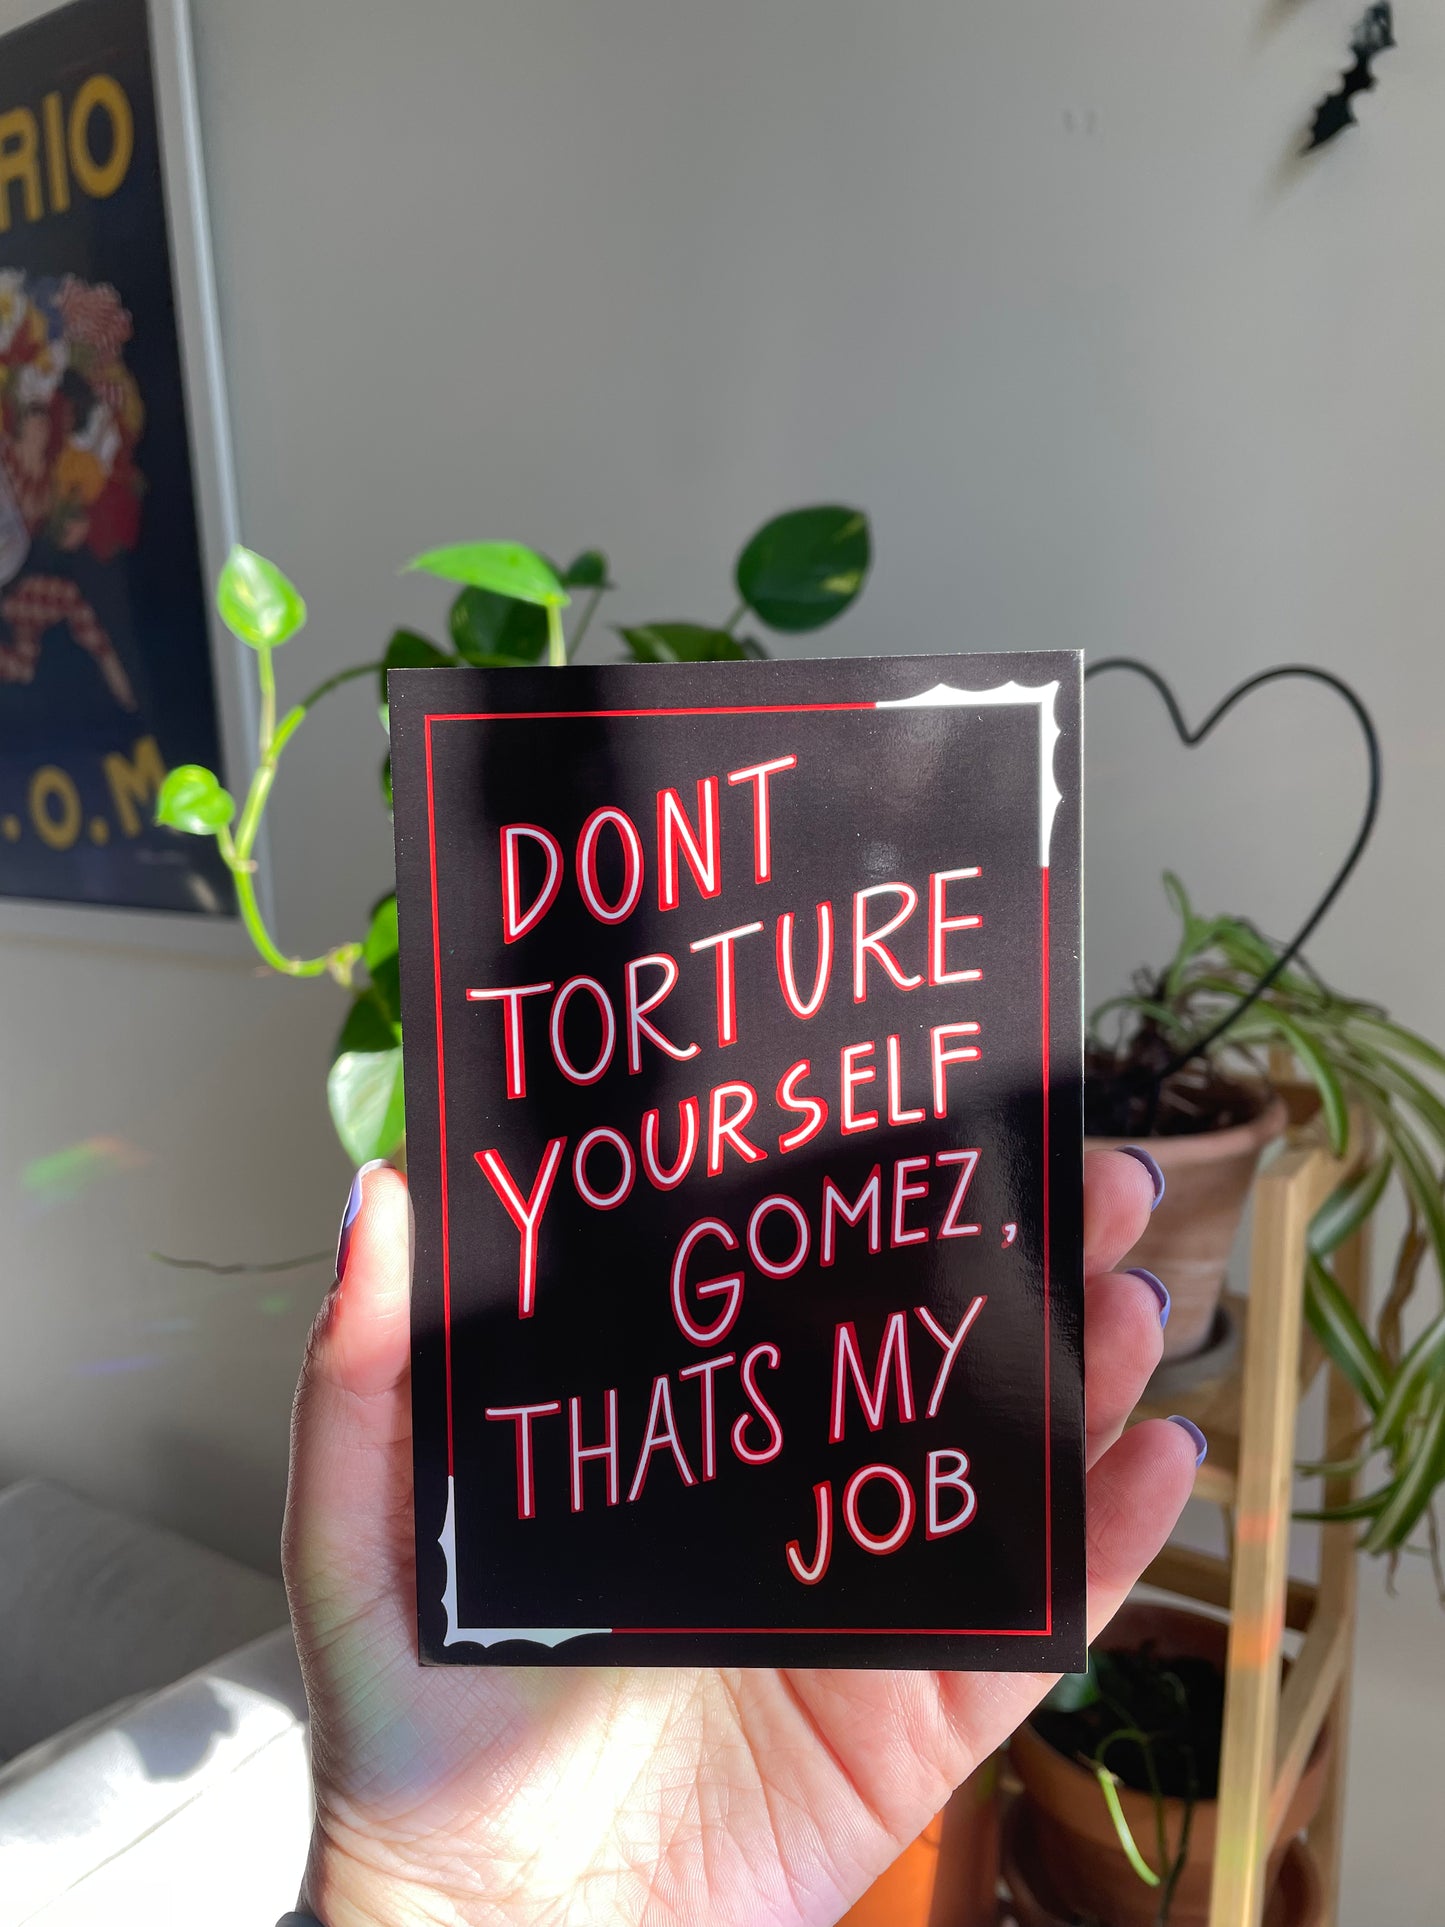 Don't Torture Yourself Gomez, That's My Job - Addams Family Art Print